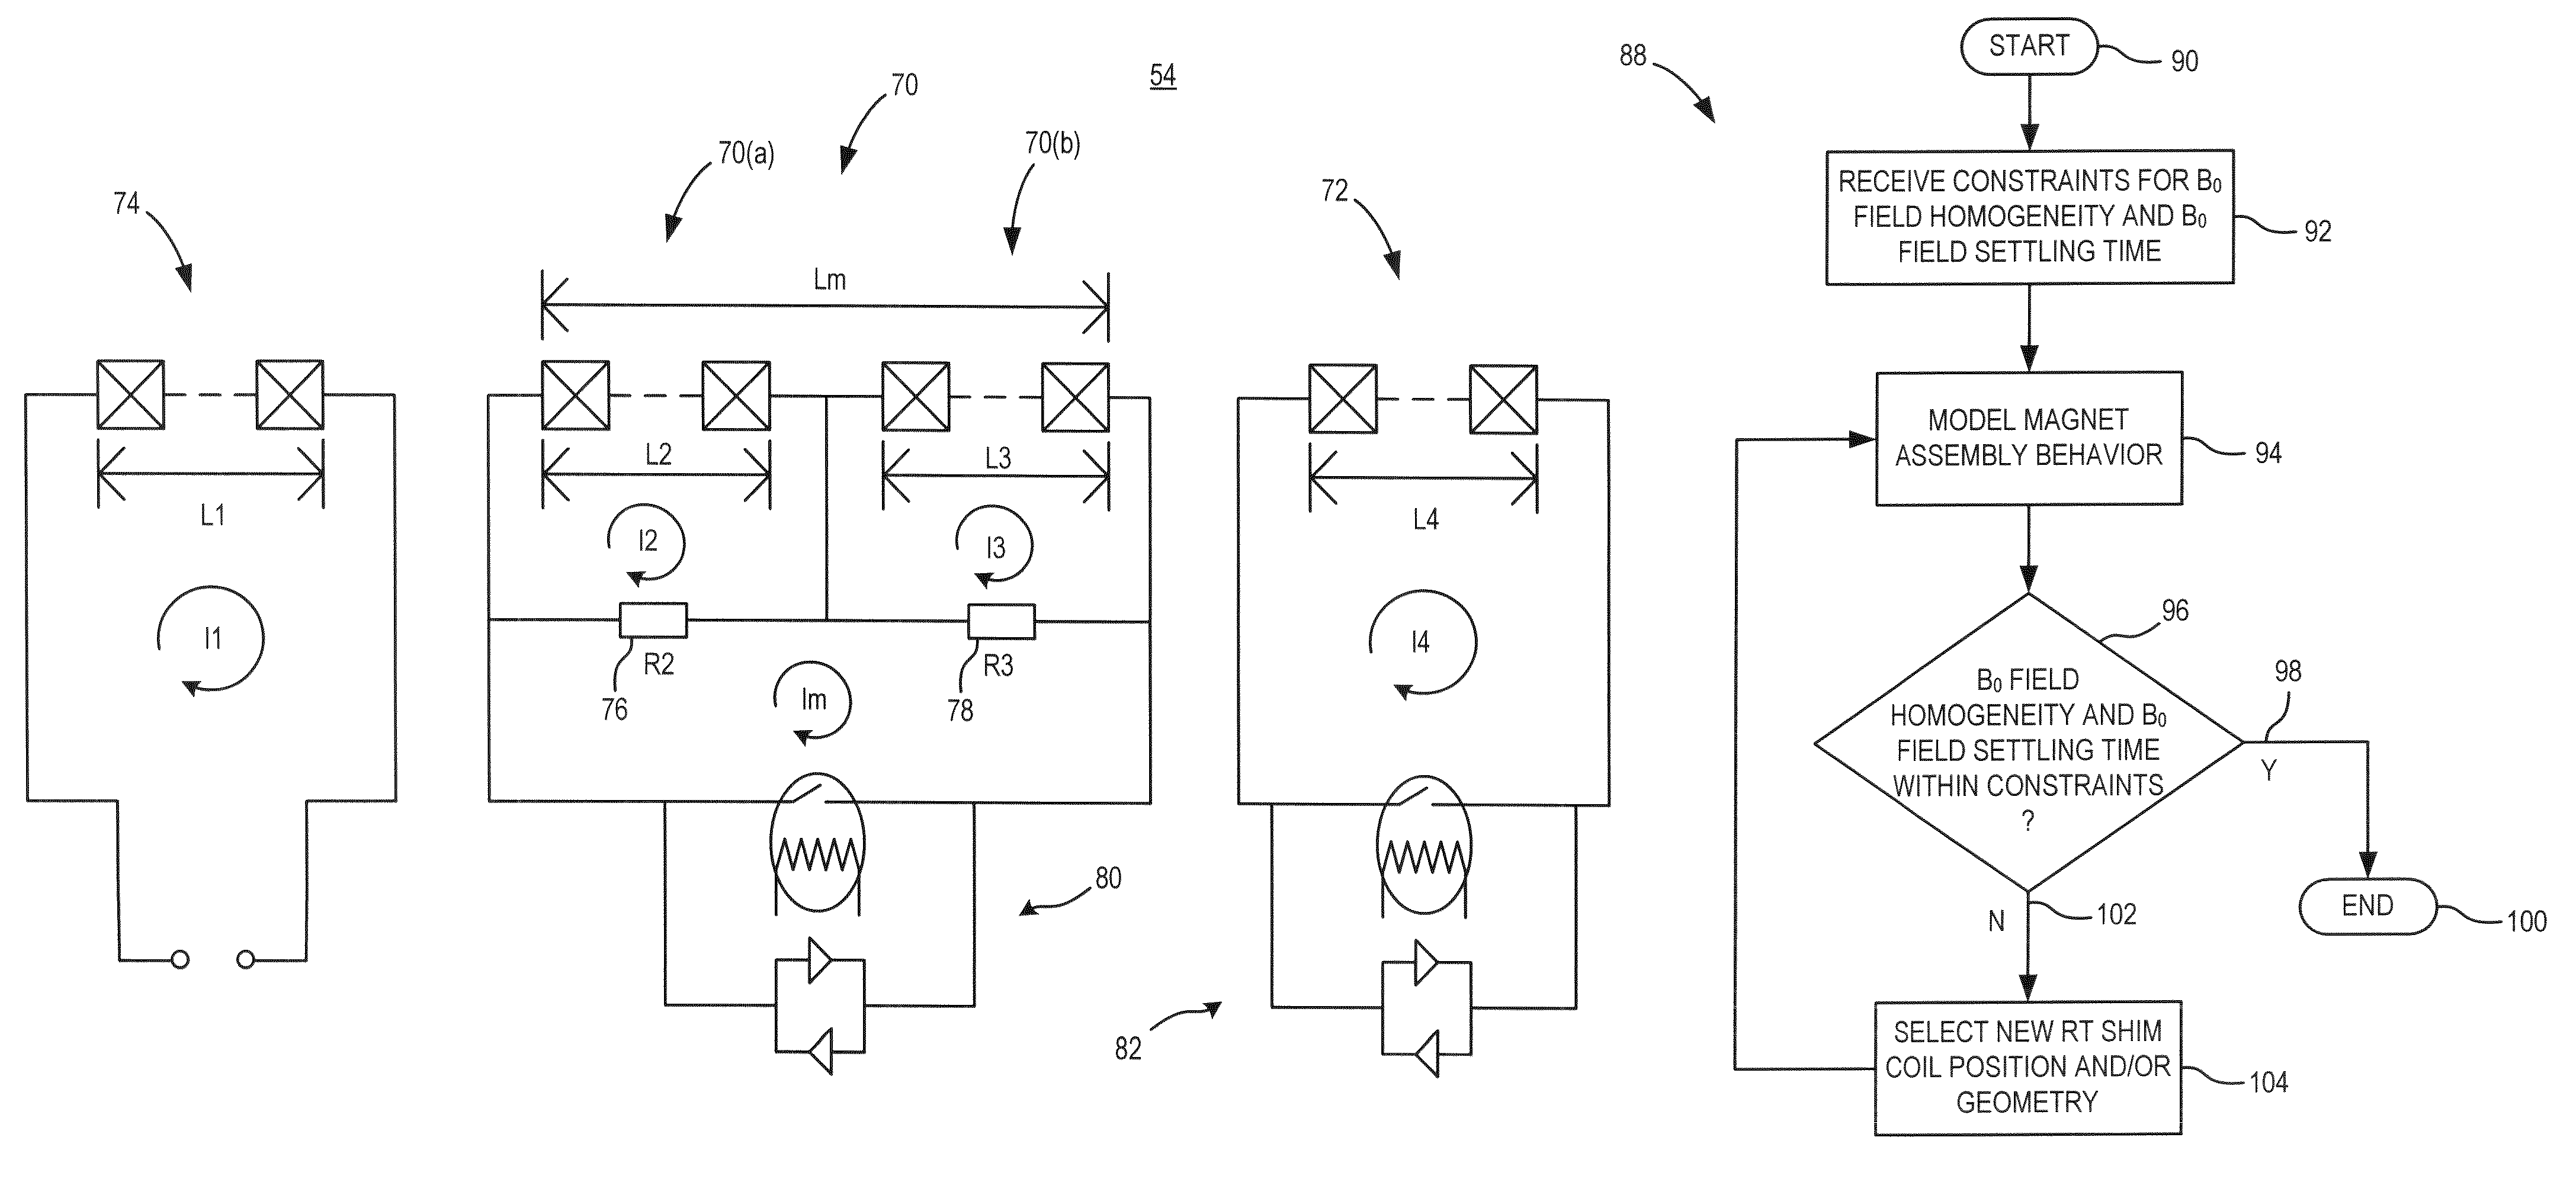 Method of designing a shim coil to reduce field settling time